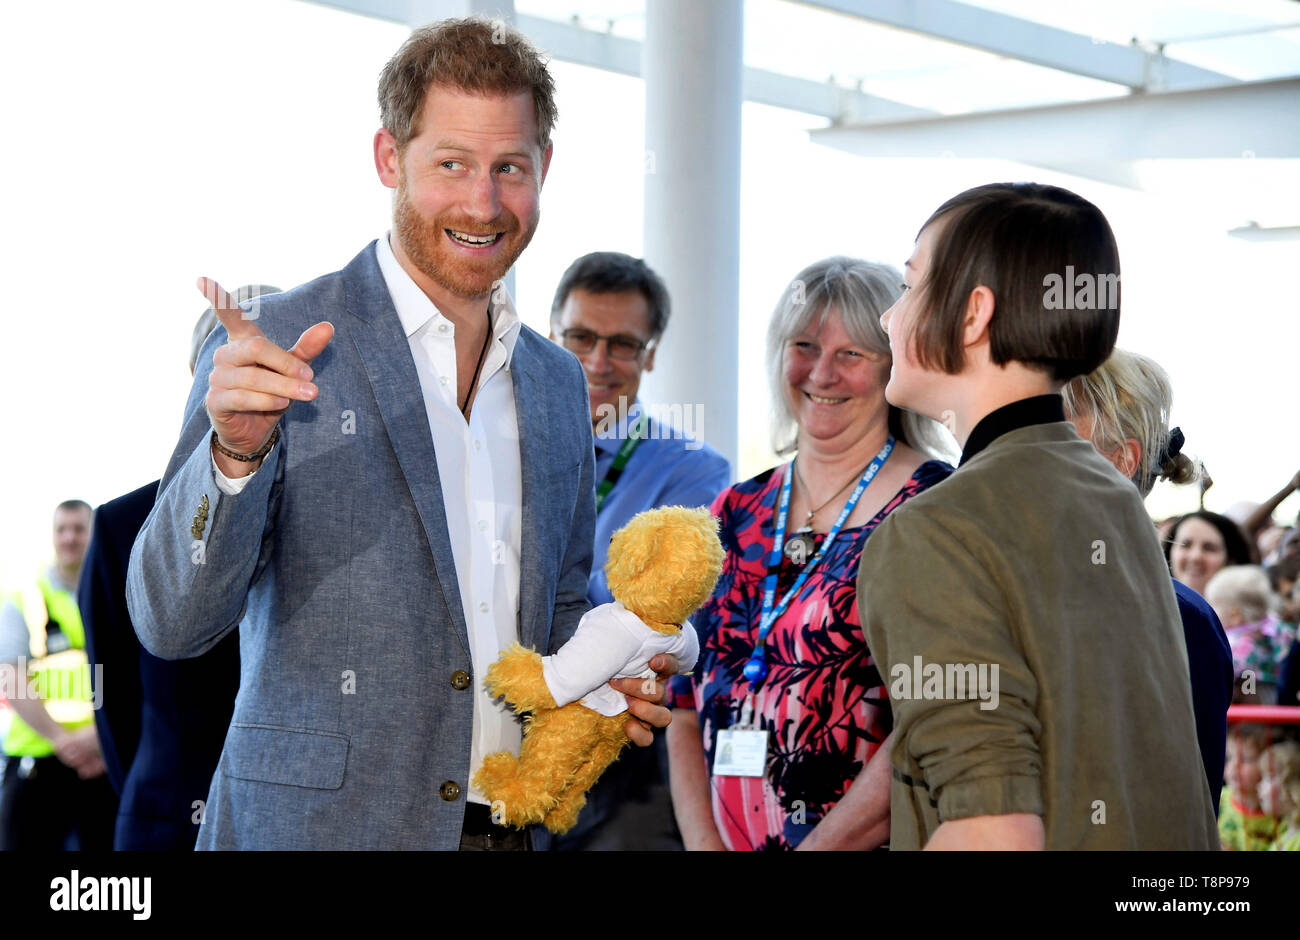 The Duke of Sussex is gifted a teddy bear by former patient Daisy Wingrove during a visit to Oxford Children's Hospital, based at the John Radcliffe hospital site in Oxford. Stock Photo